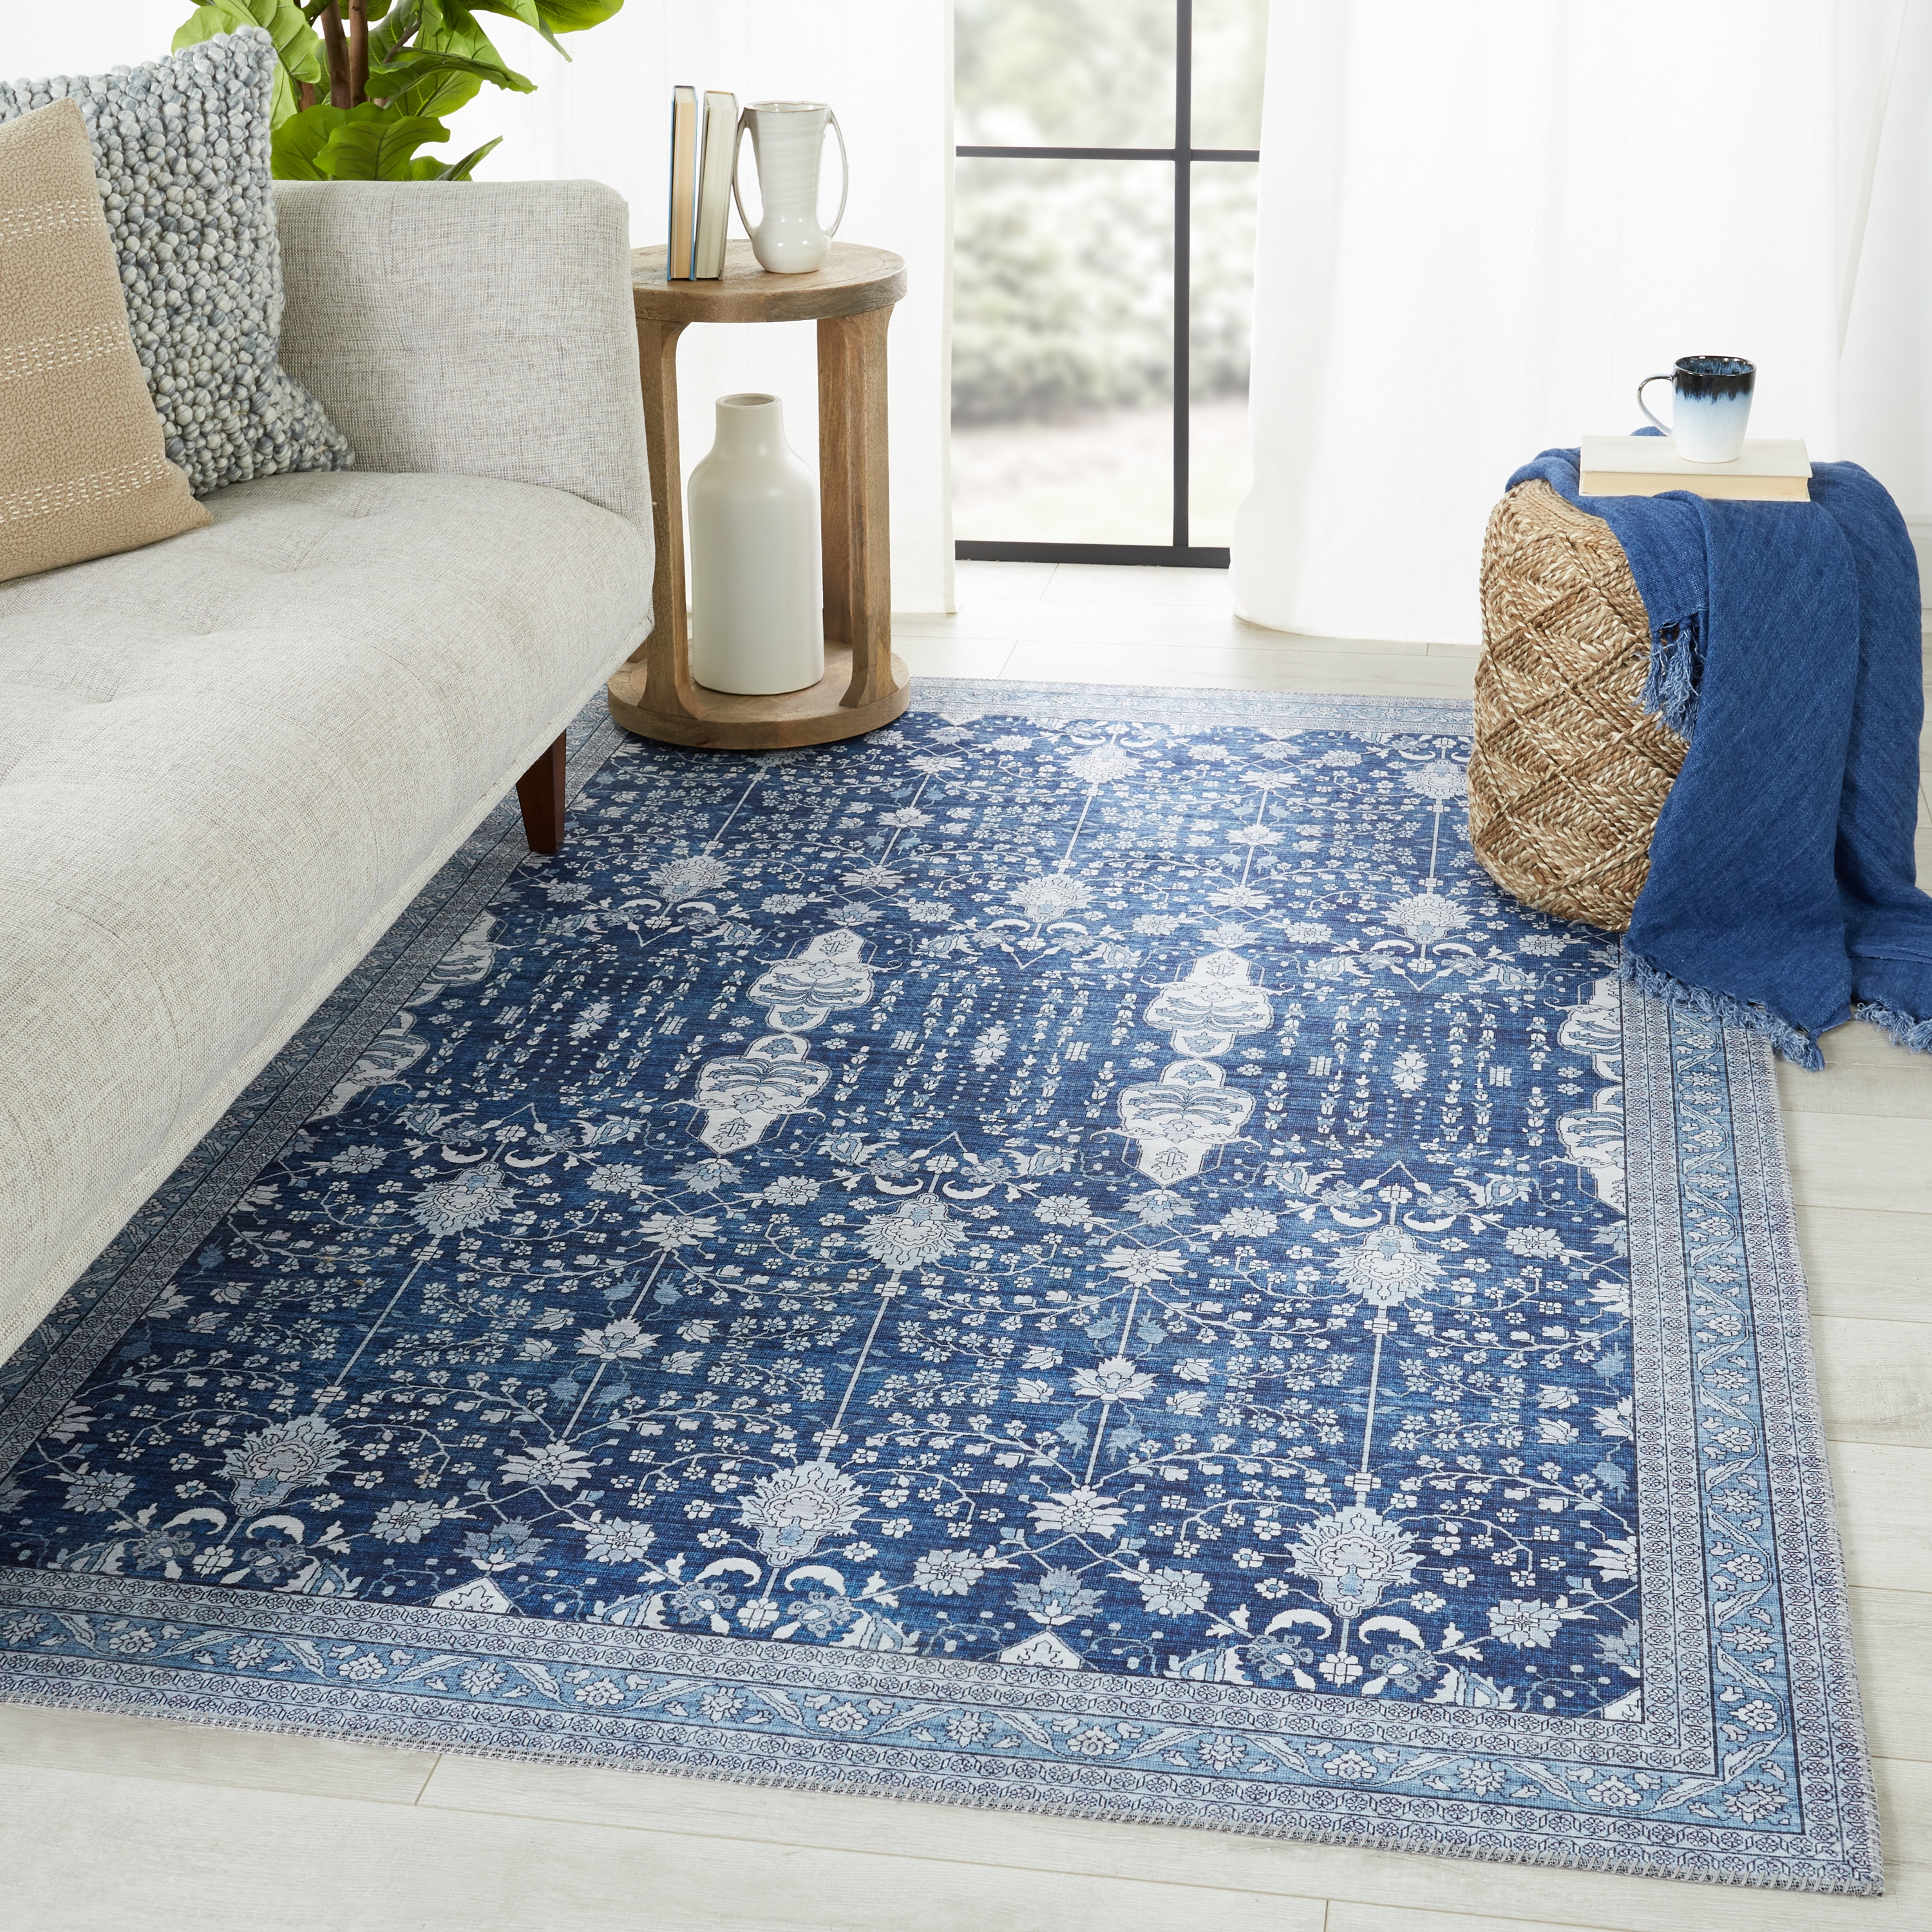 Vibe by Calla Oriental Blue/ White Area Rug (9'X12') - Image 4